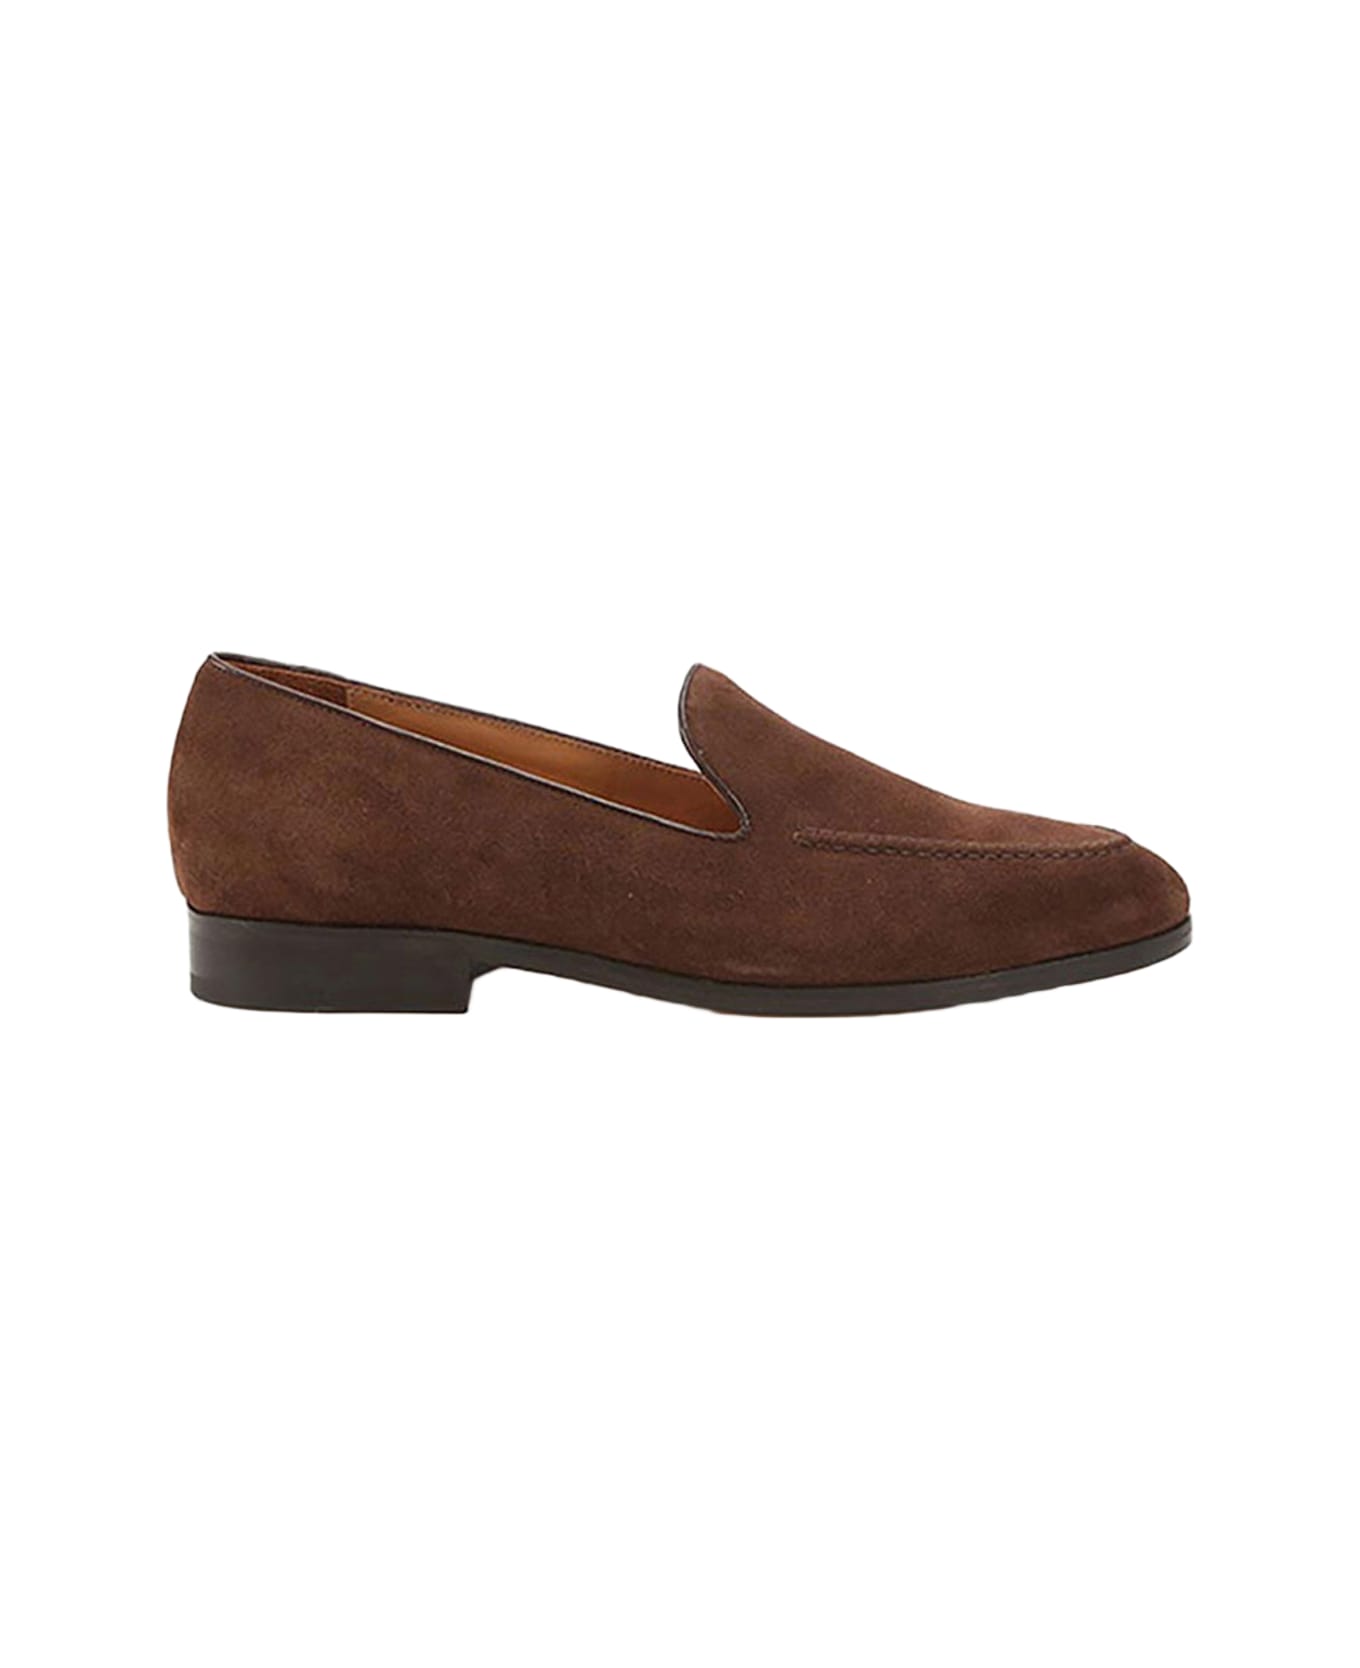 CB Made in Italy Suede Slip-on Dove - Chocolate